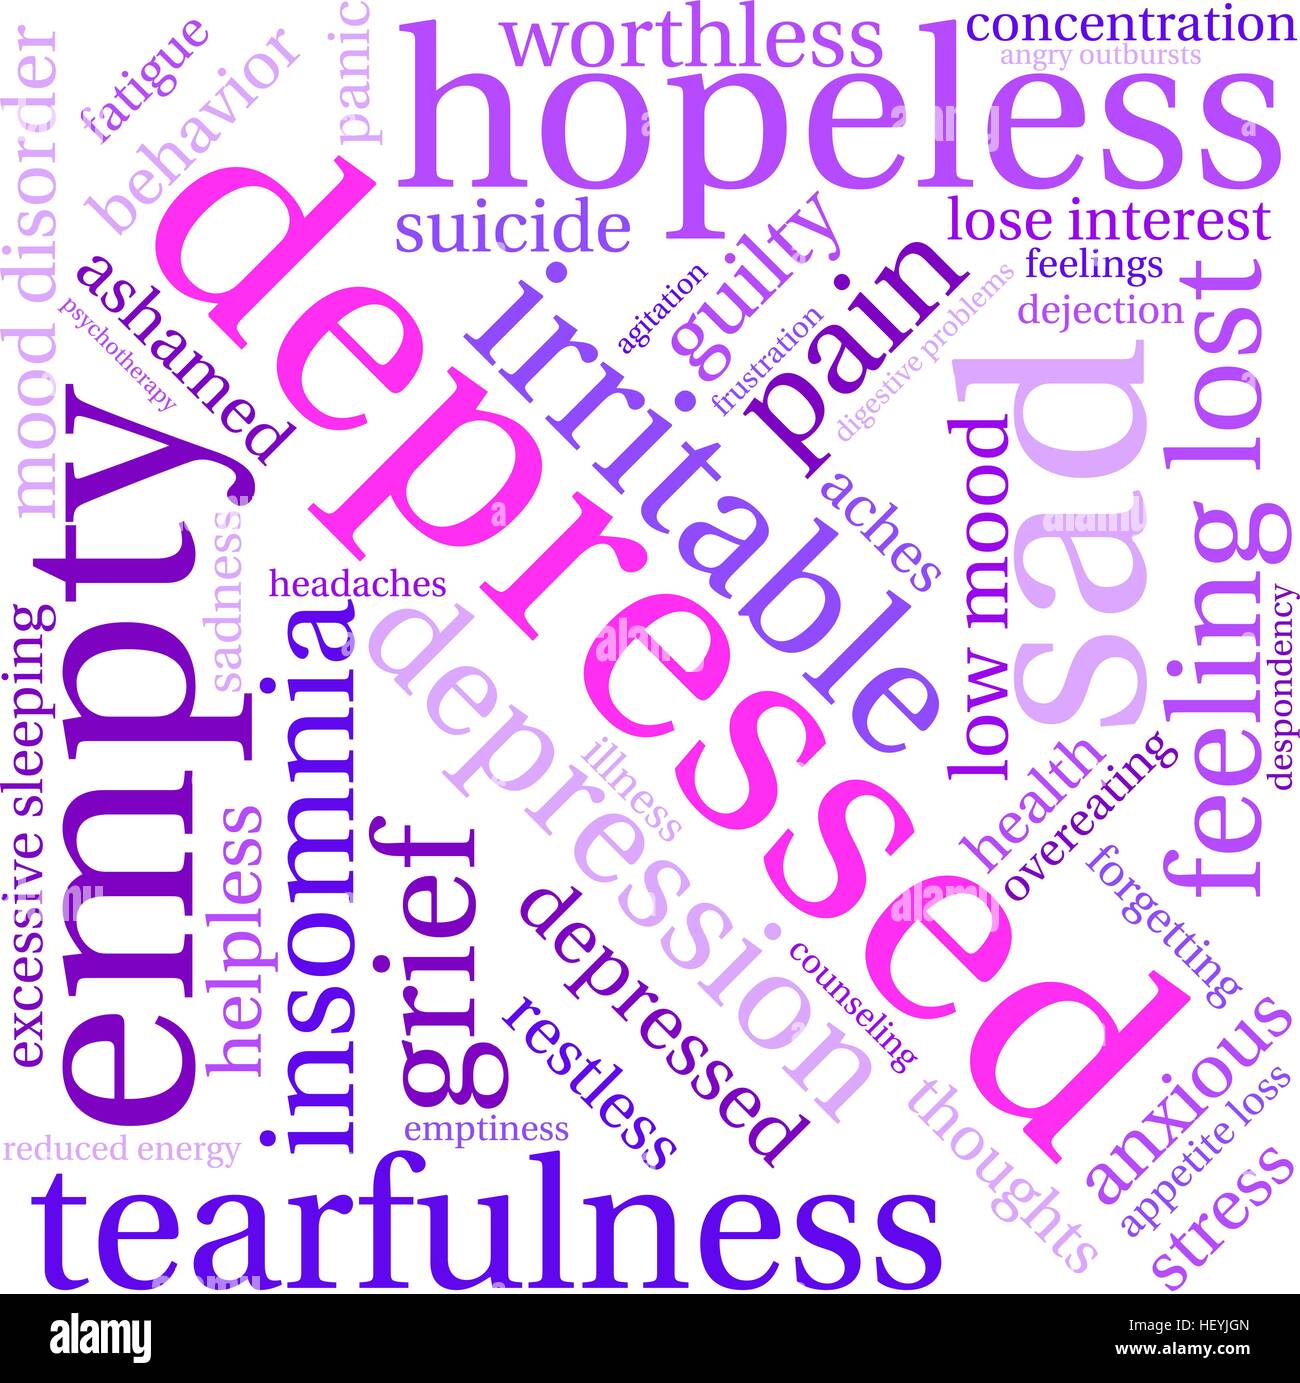 Depressed word cloud on a white background. Stock Vector